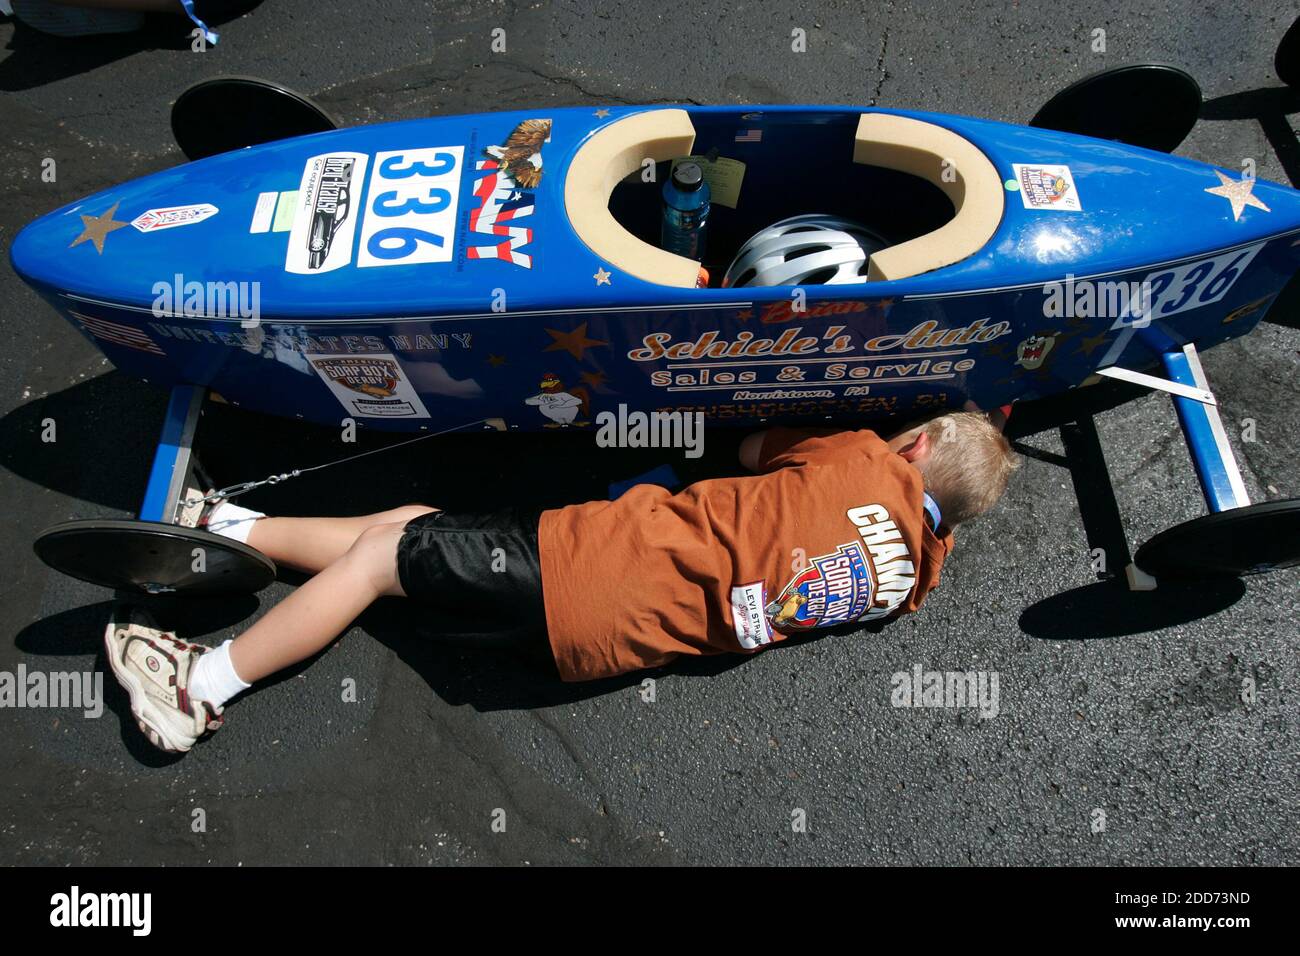 NO FILM, NO VIDEO, NO TV, NO DOCUMENTARY - Brian Carpenter, a stock class racer from Conshohocken, Pennsylvania, takes a nap in the meager shade of his car between heats at the 70th All-American Soap Box Derby in Akron, OH, USA on July 21, 2007. Photo by Lew Stamp/Akron Beacon Journal/MCT/Cameleon/ABACAPRESS.COM Stock Photo